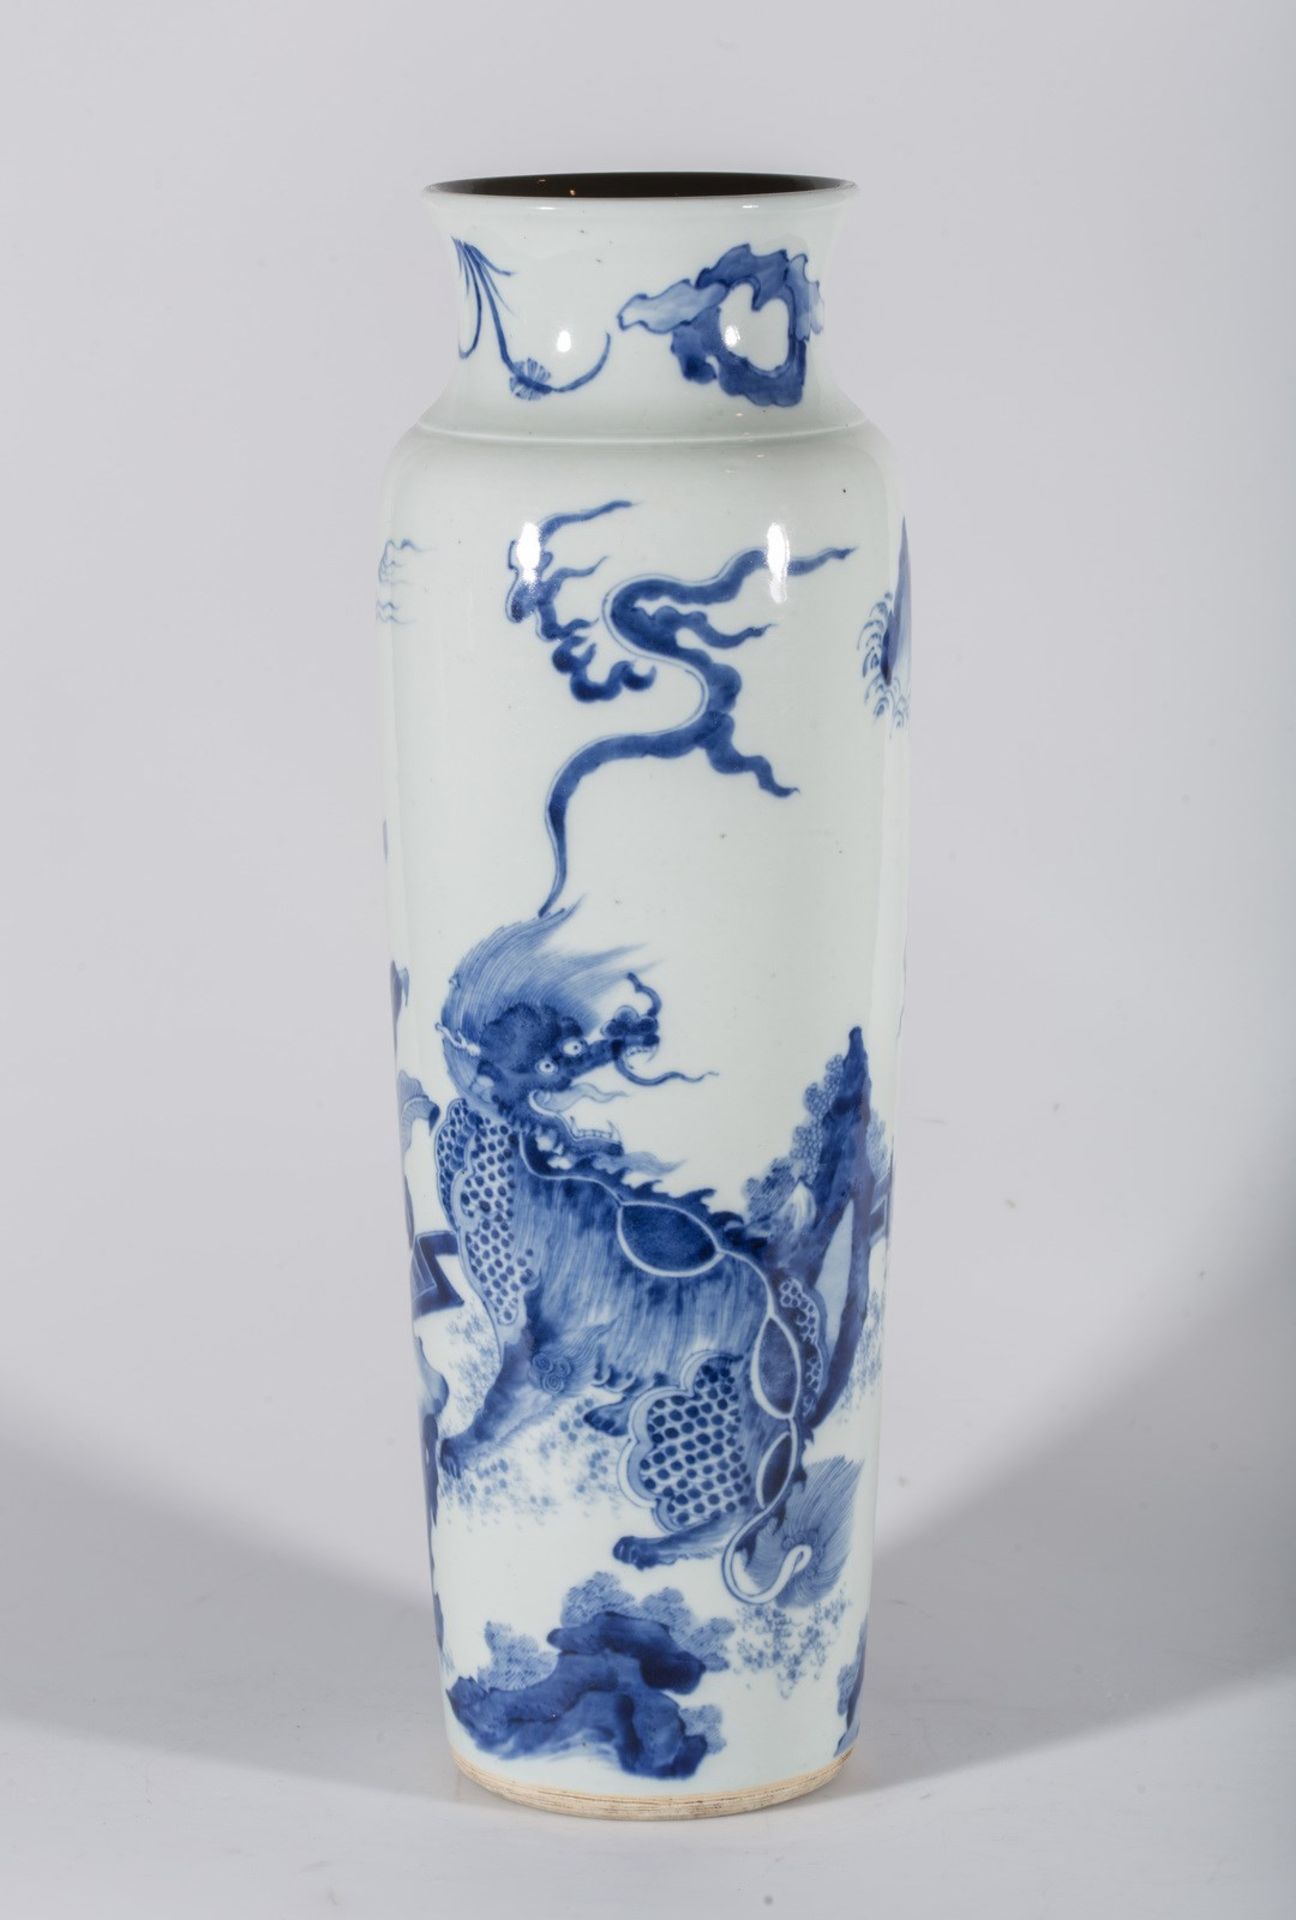 Arte Cinese A blue and white porcelain vase painted with pho dogChina, Transitional period, 17th ce - Image 2 of 4